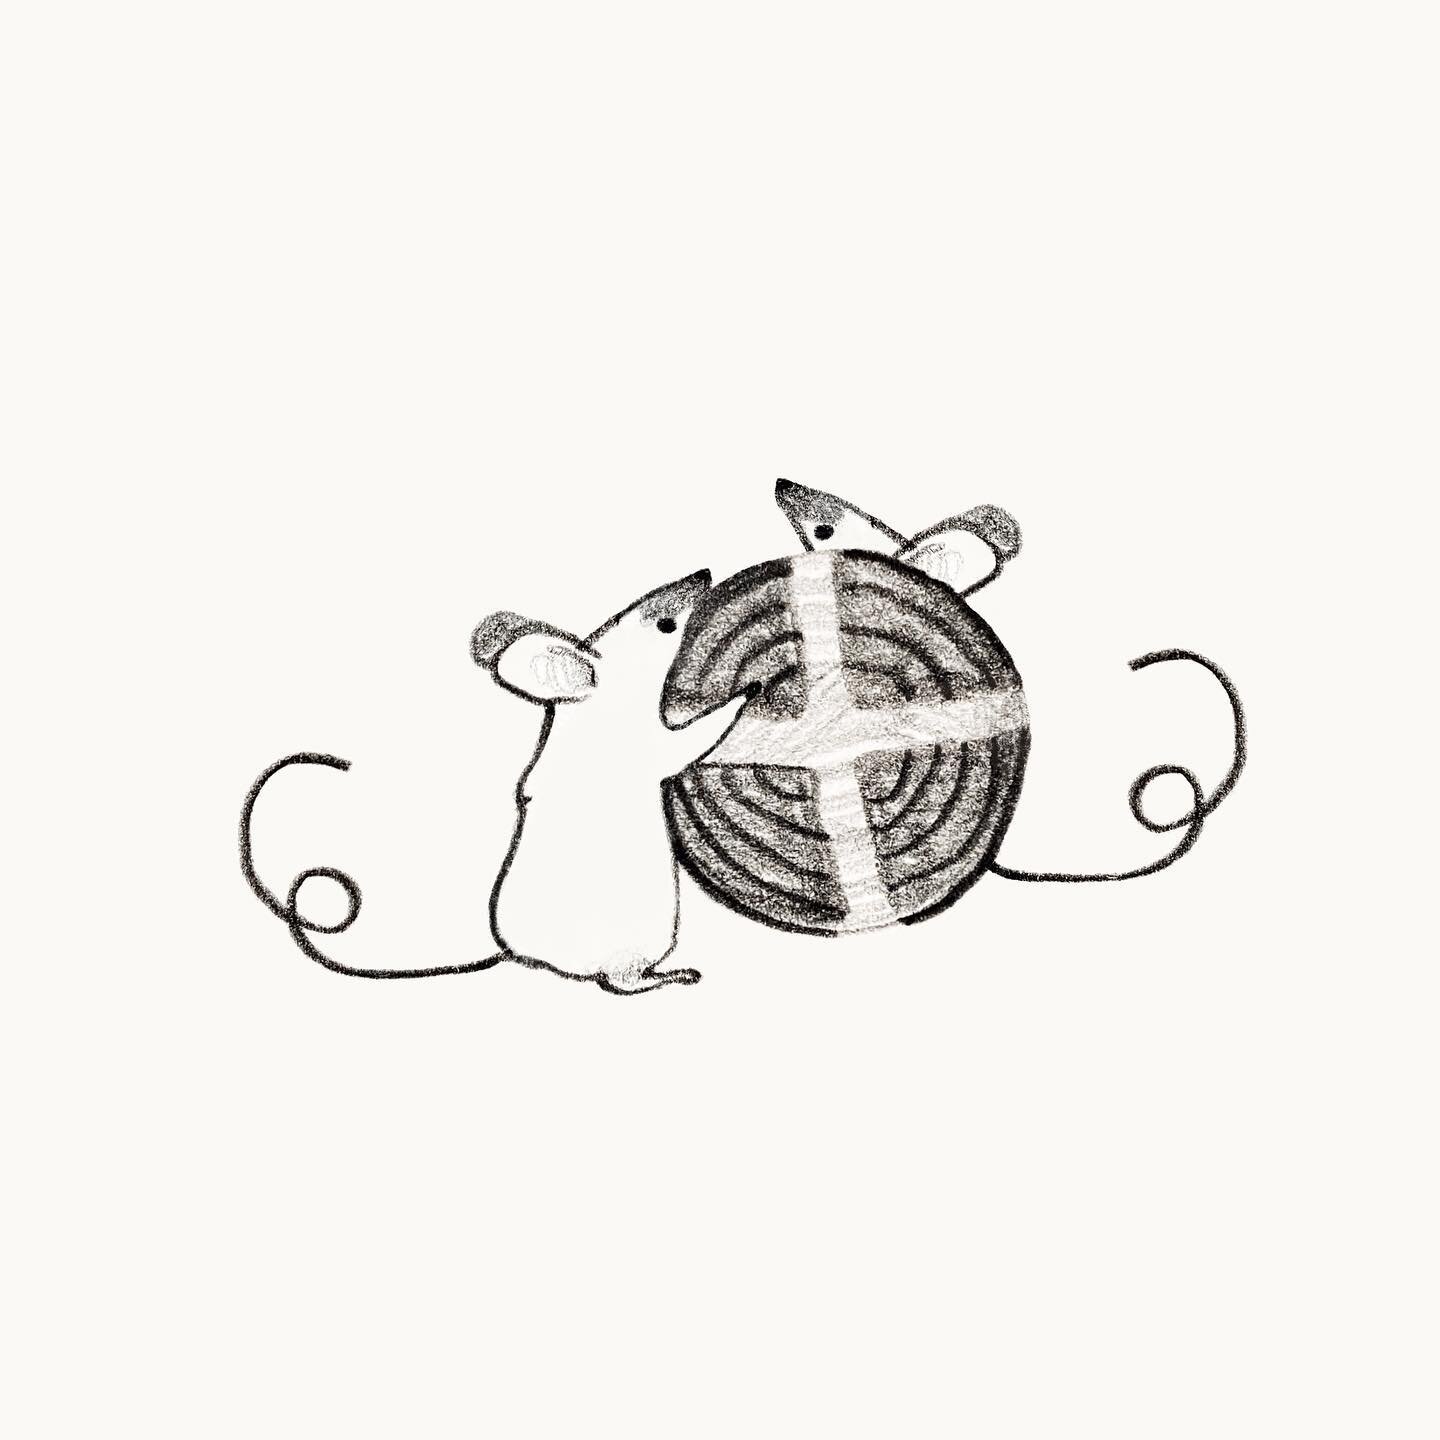 Two small mice celebrating with (biodinamic) bread after a break as next week i start my new job! Ill write more about it on Patreon soon 🌾 

#illustration #illustrator #art #artist #drawing #drawings #sketchbook